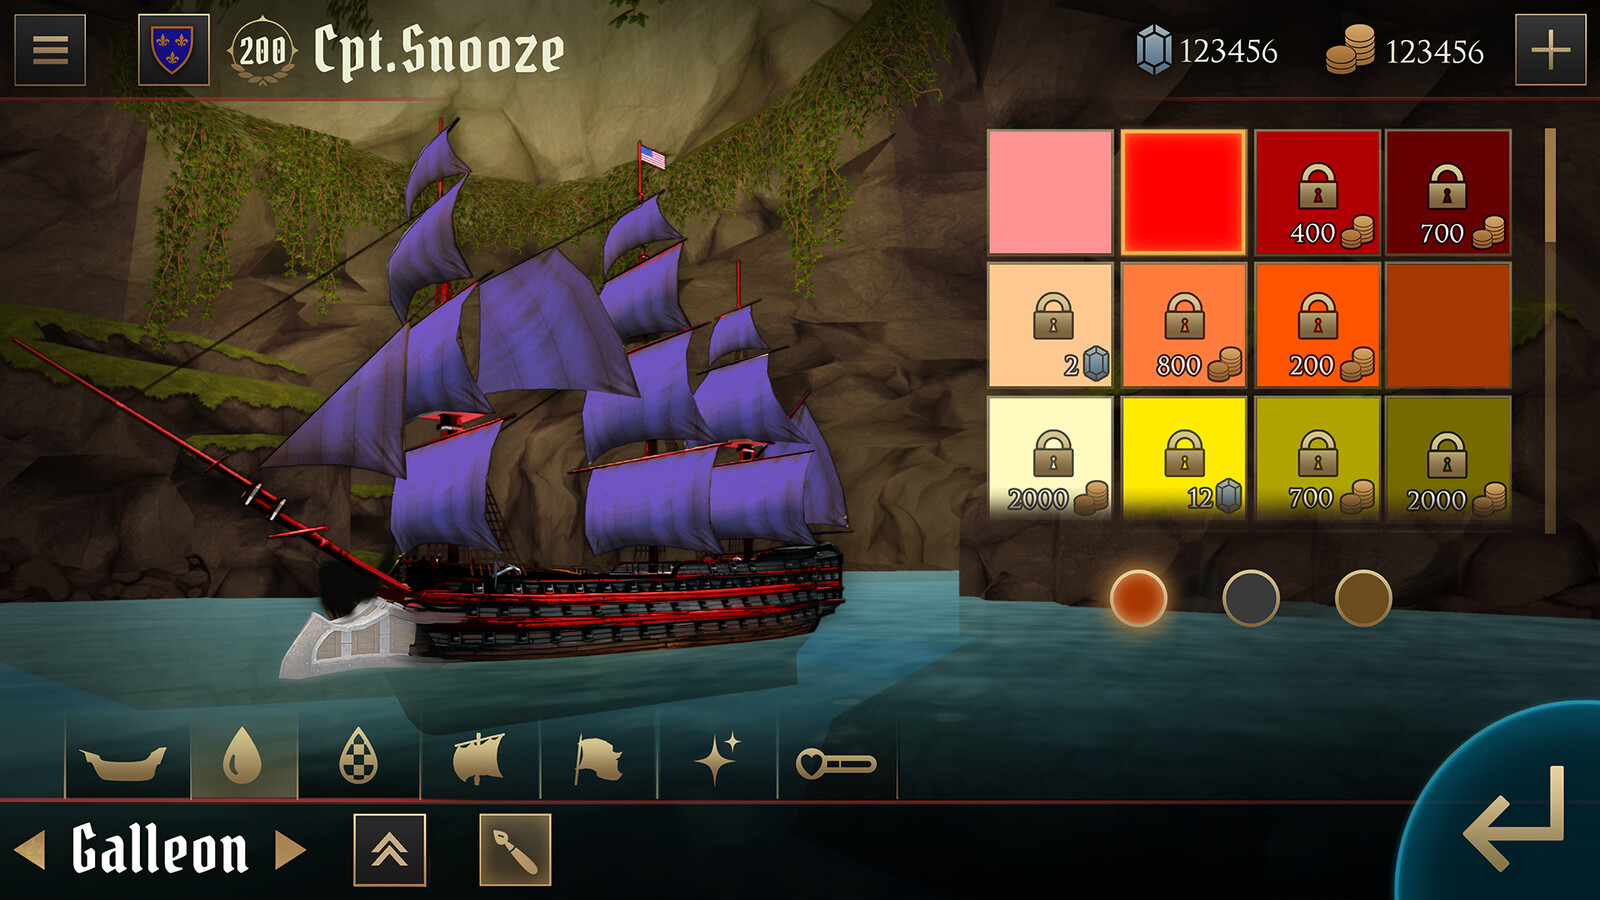 Ship customization UI, colors section. each ship (and its add-ons) would have three areas to assign a color to. Selecting the color slot and pressing a color allowed for a preview on the ship model. pressing it again would equip the color to that slot.